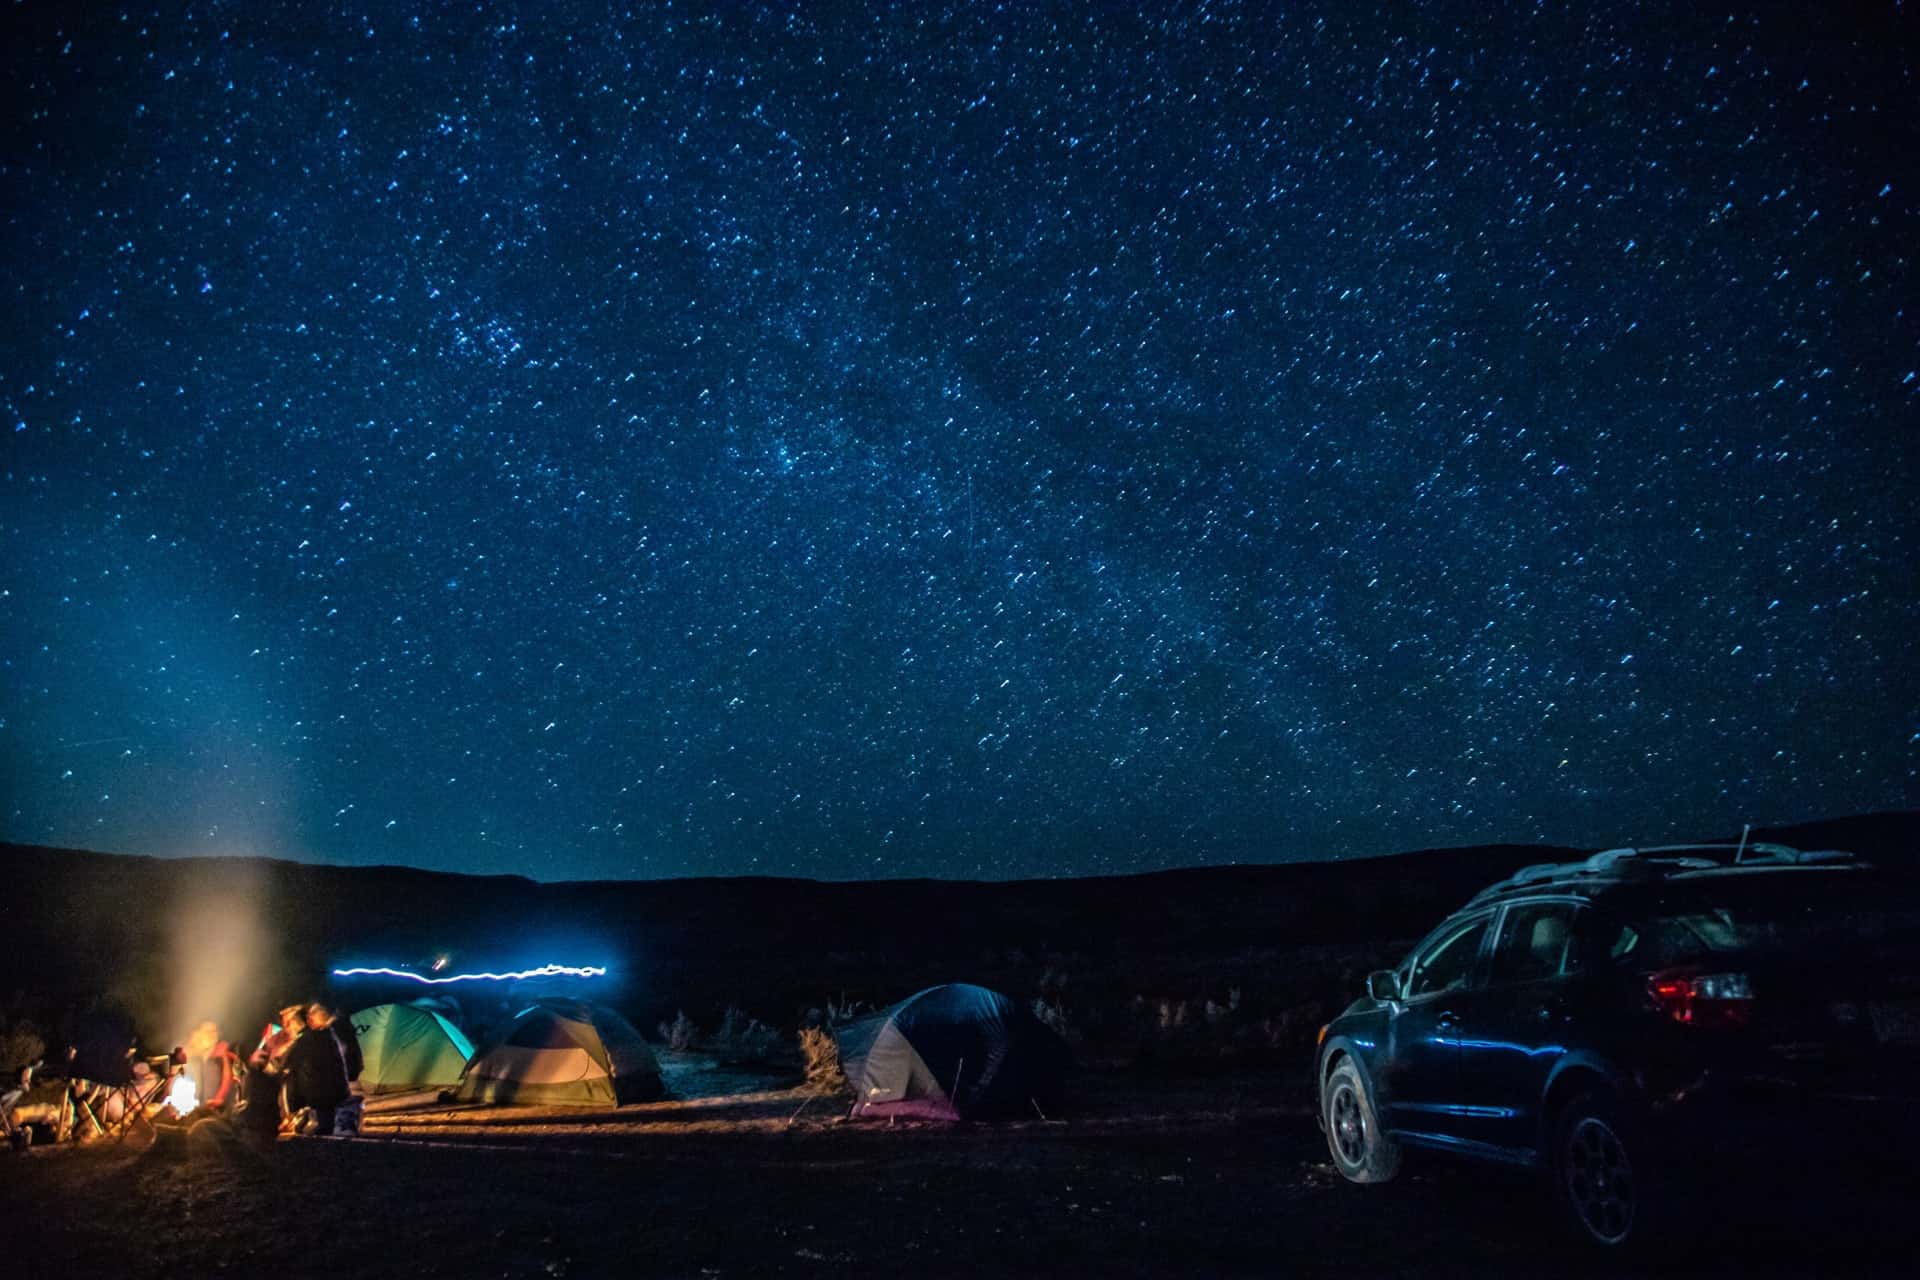 Best things to do in Moab Utah - Rosanne McHenry - Camping under the dark skies with stars by Emma Smith on Unsplash